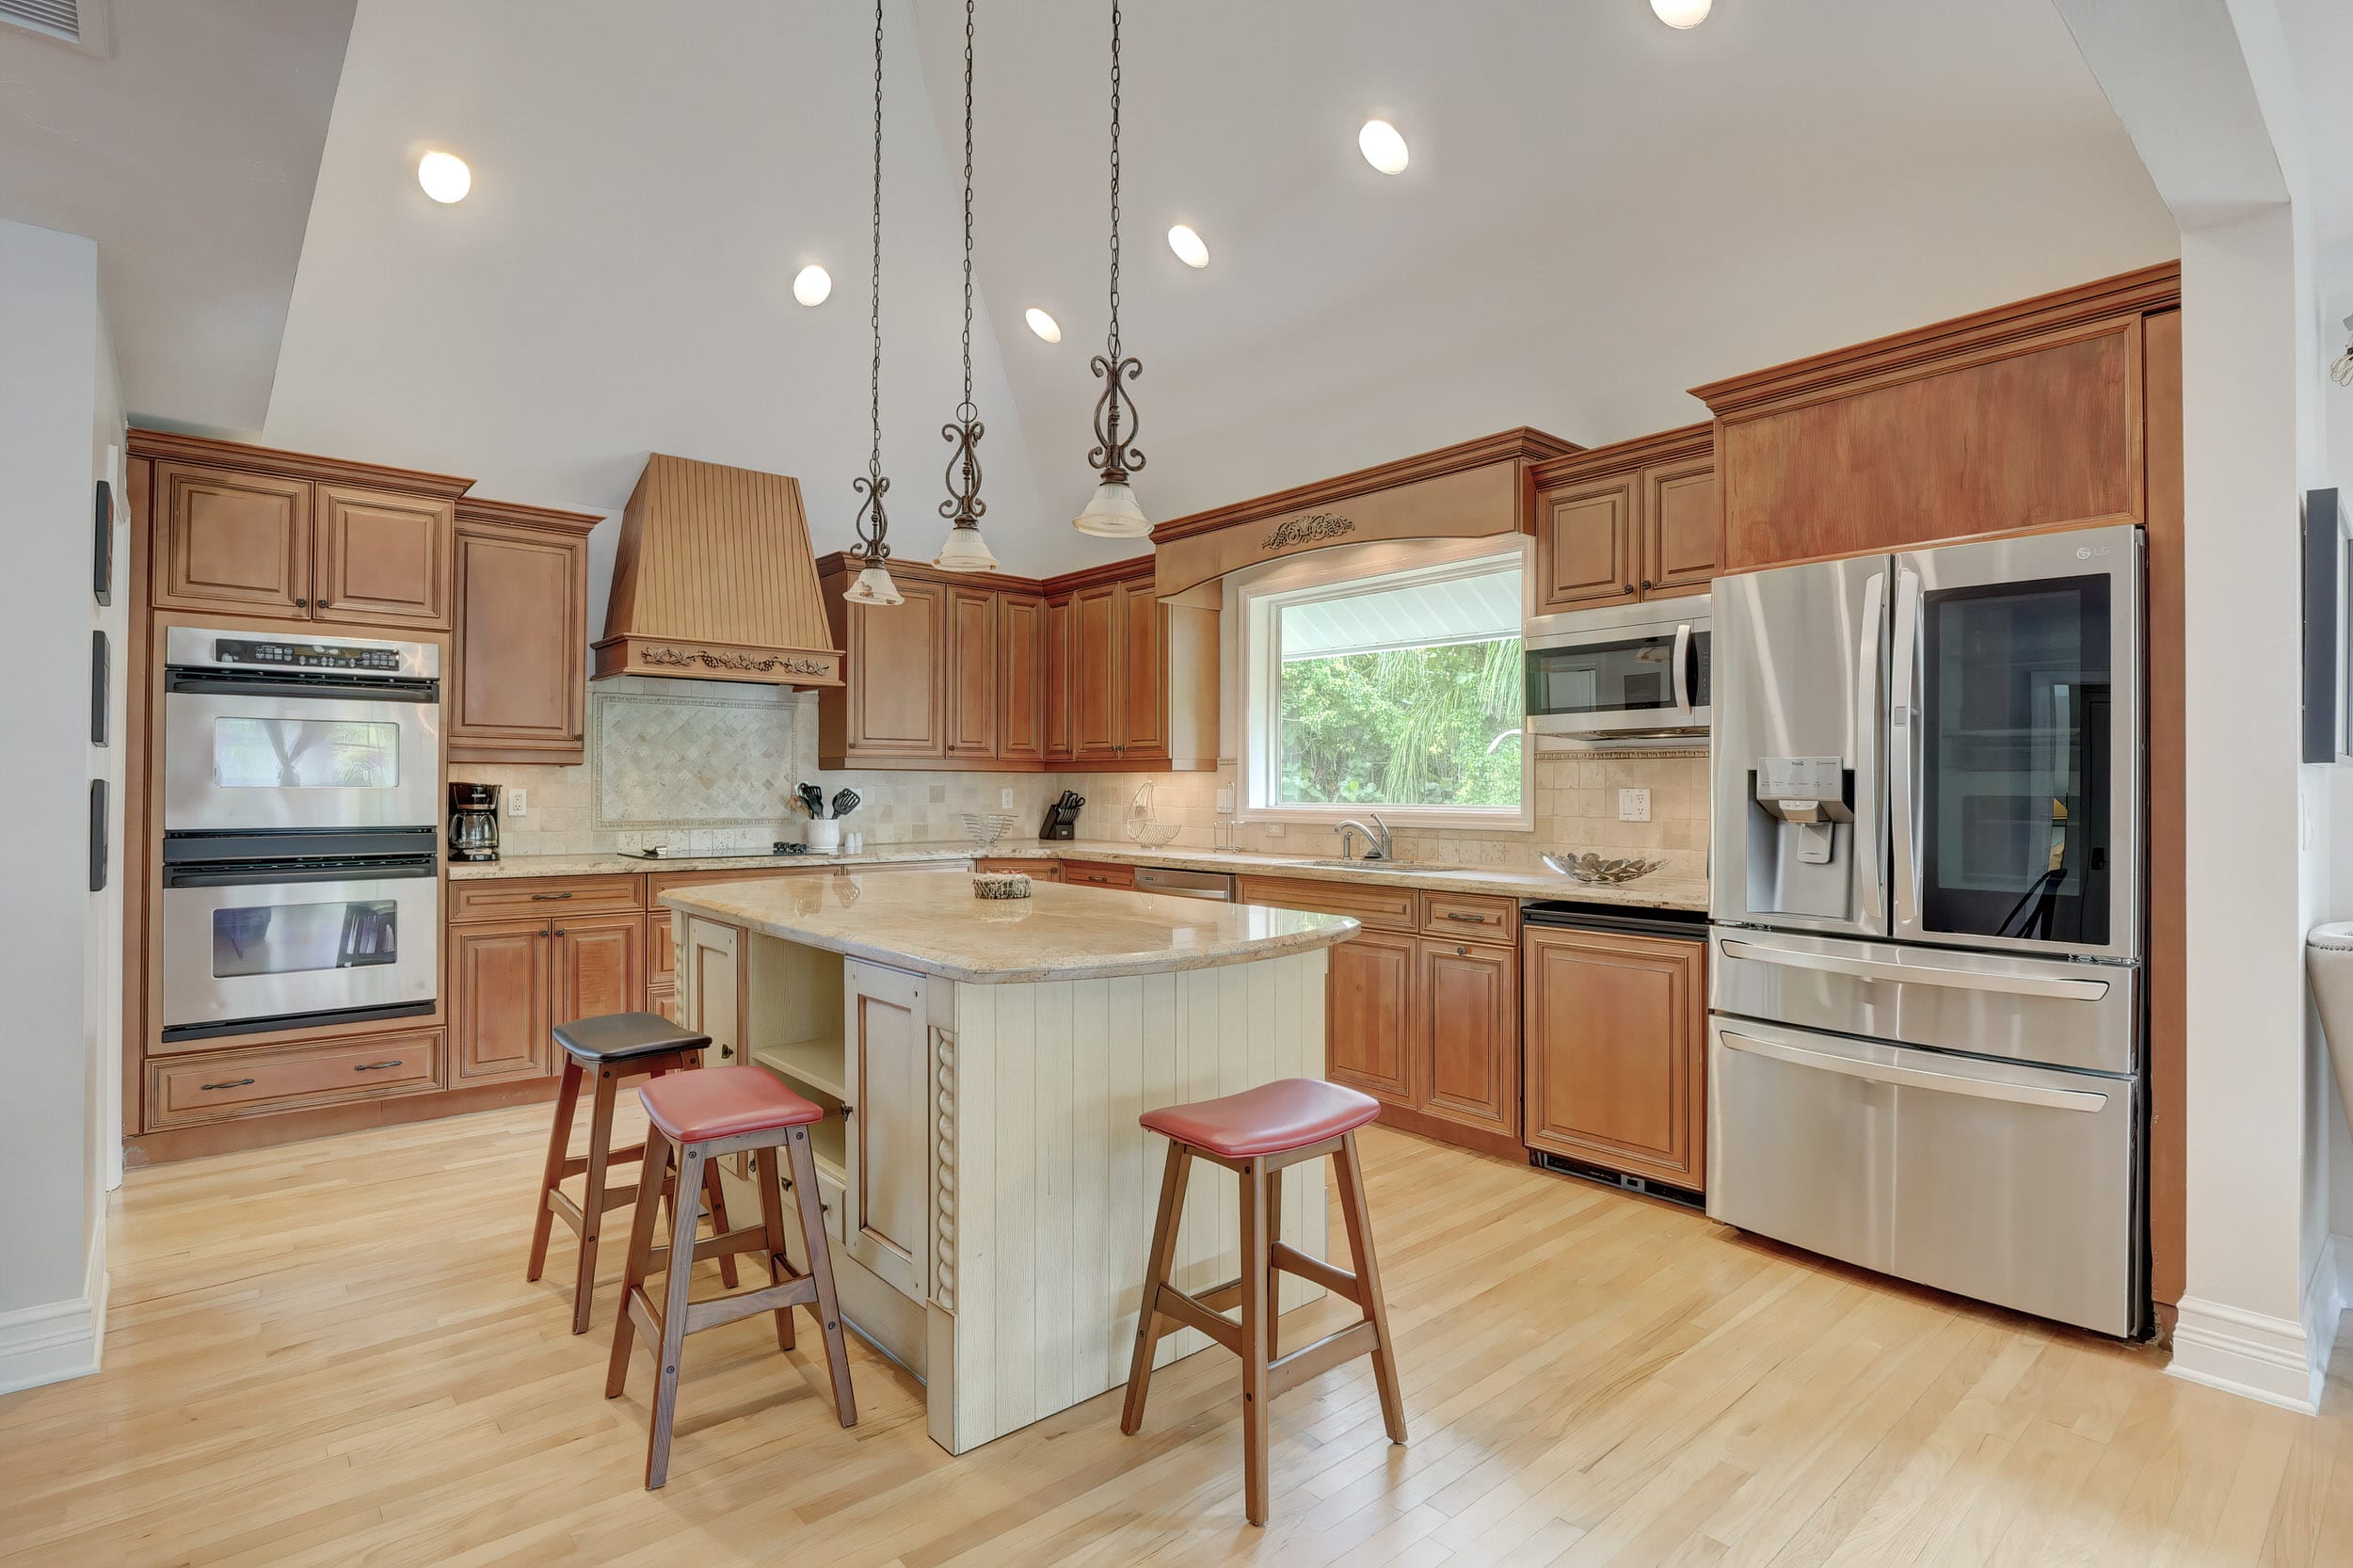 Our Kitchen Features Tall Ceilings, Stainless Appliances and A Large Center Island